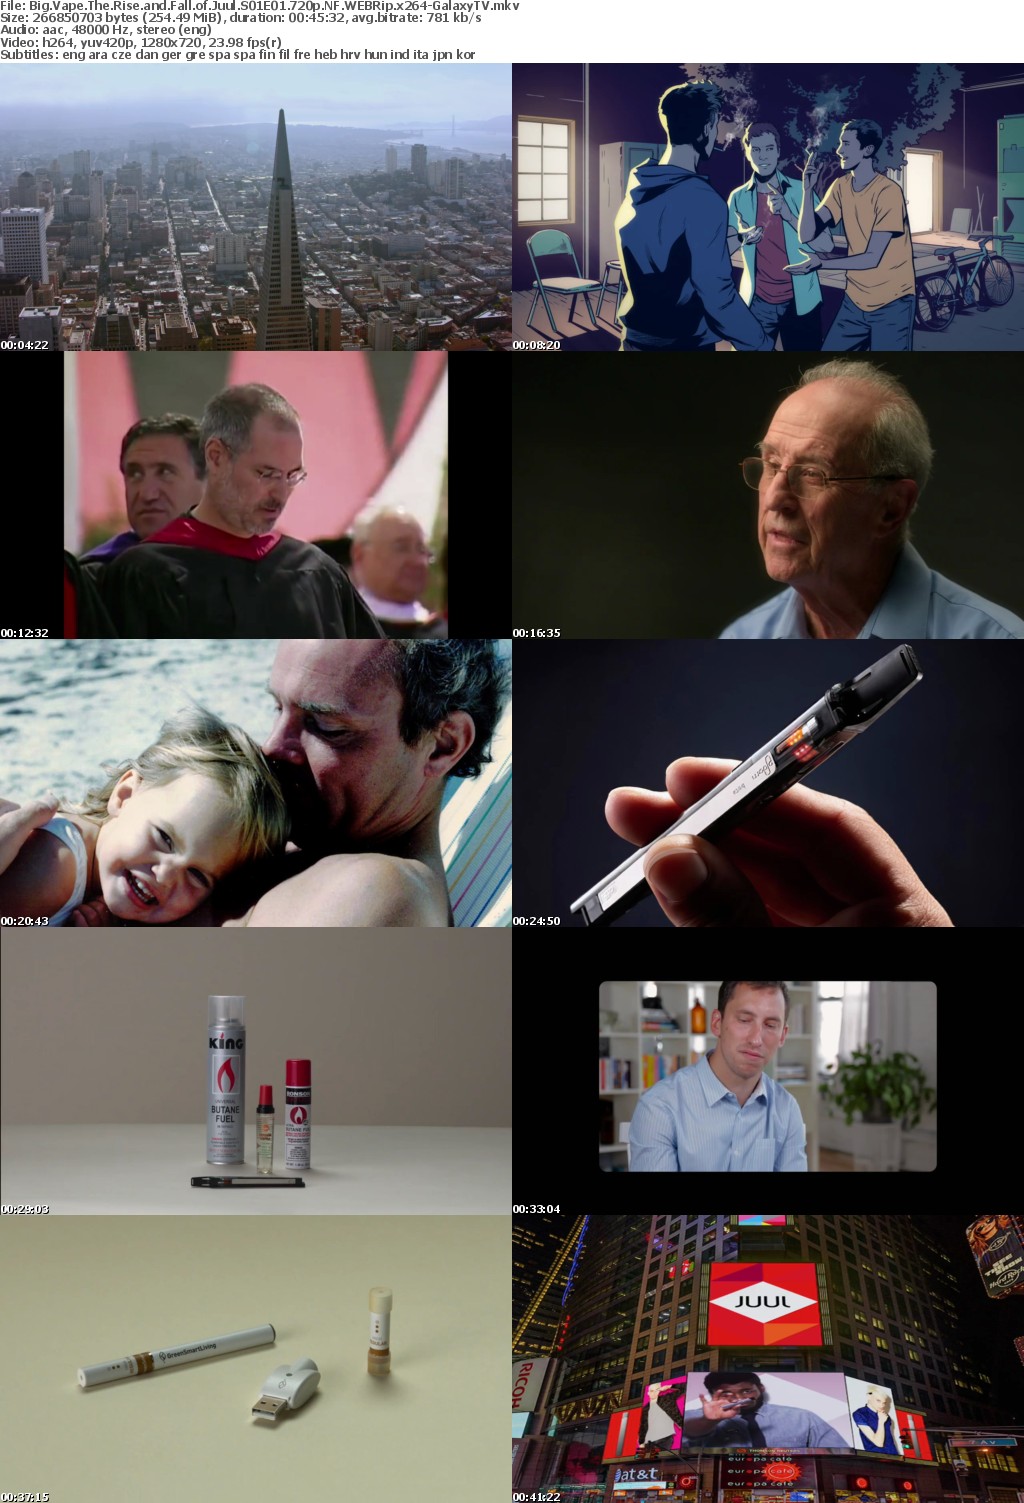 Big Vape The Rise and Fall of Juul S01 COMPLETE 720p NF WEBRip x264-GalaxyTV